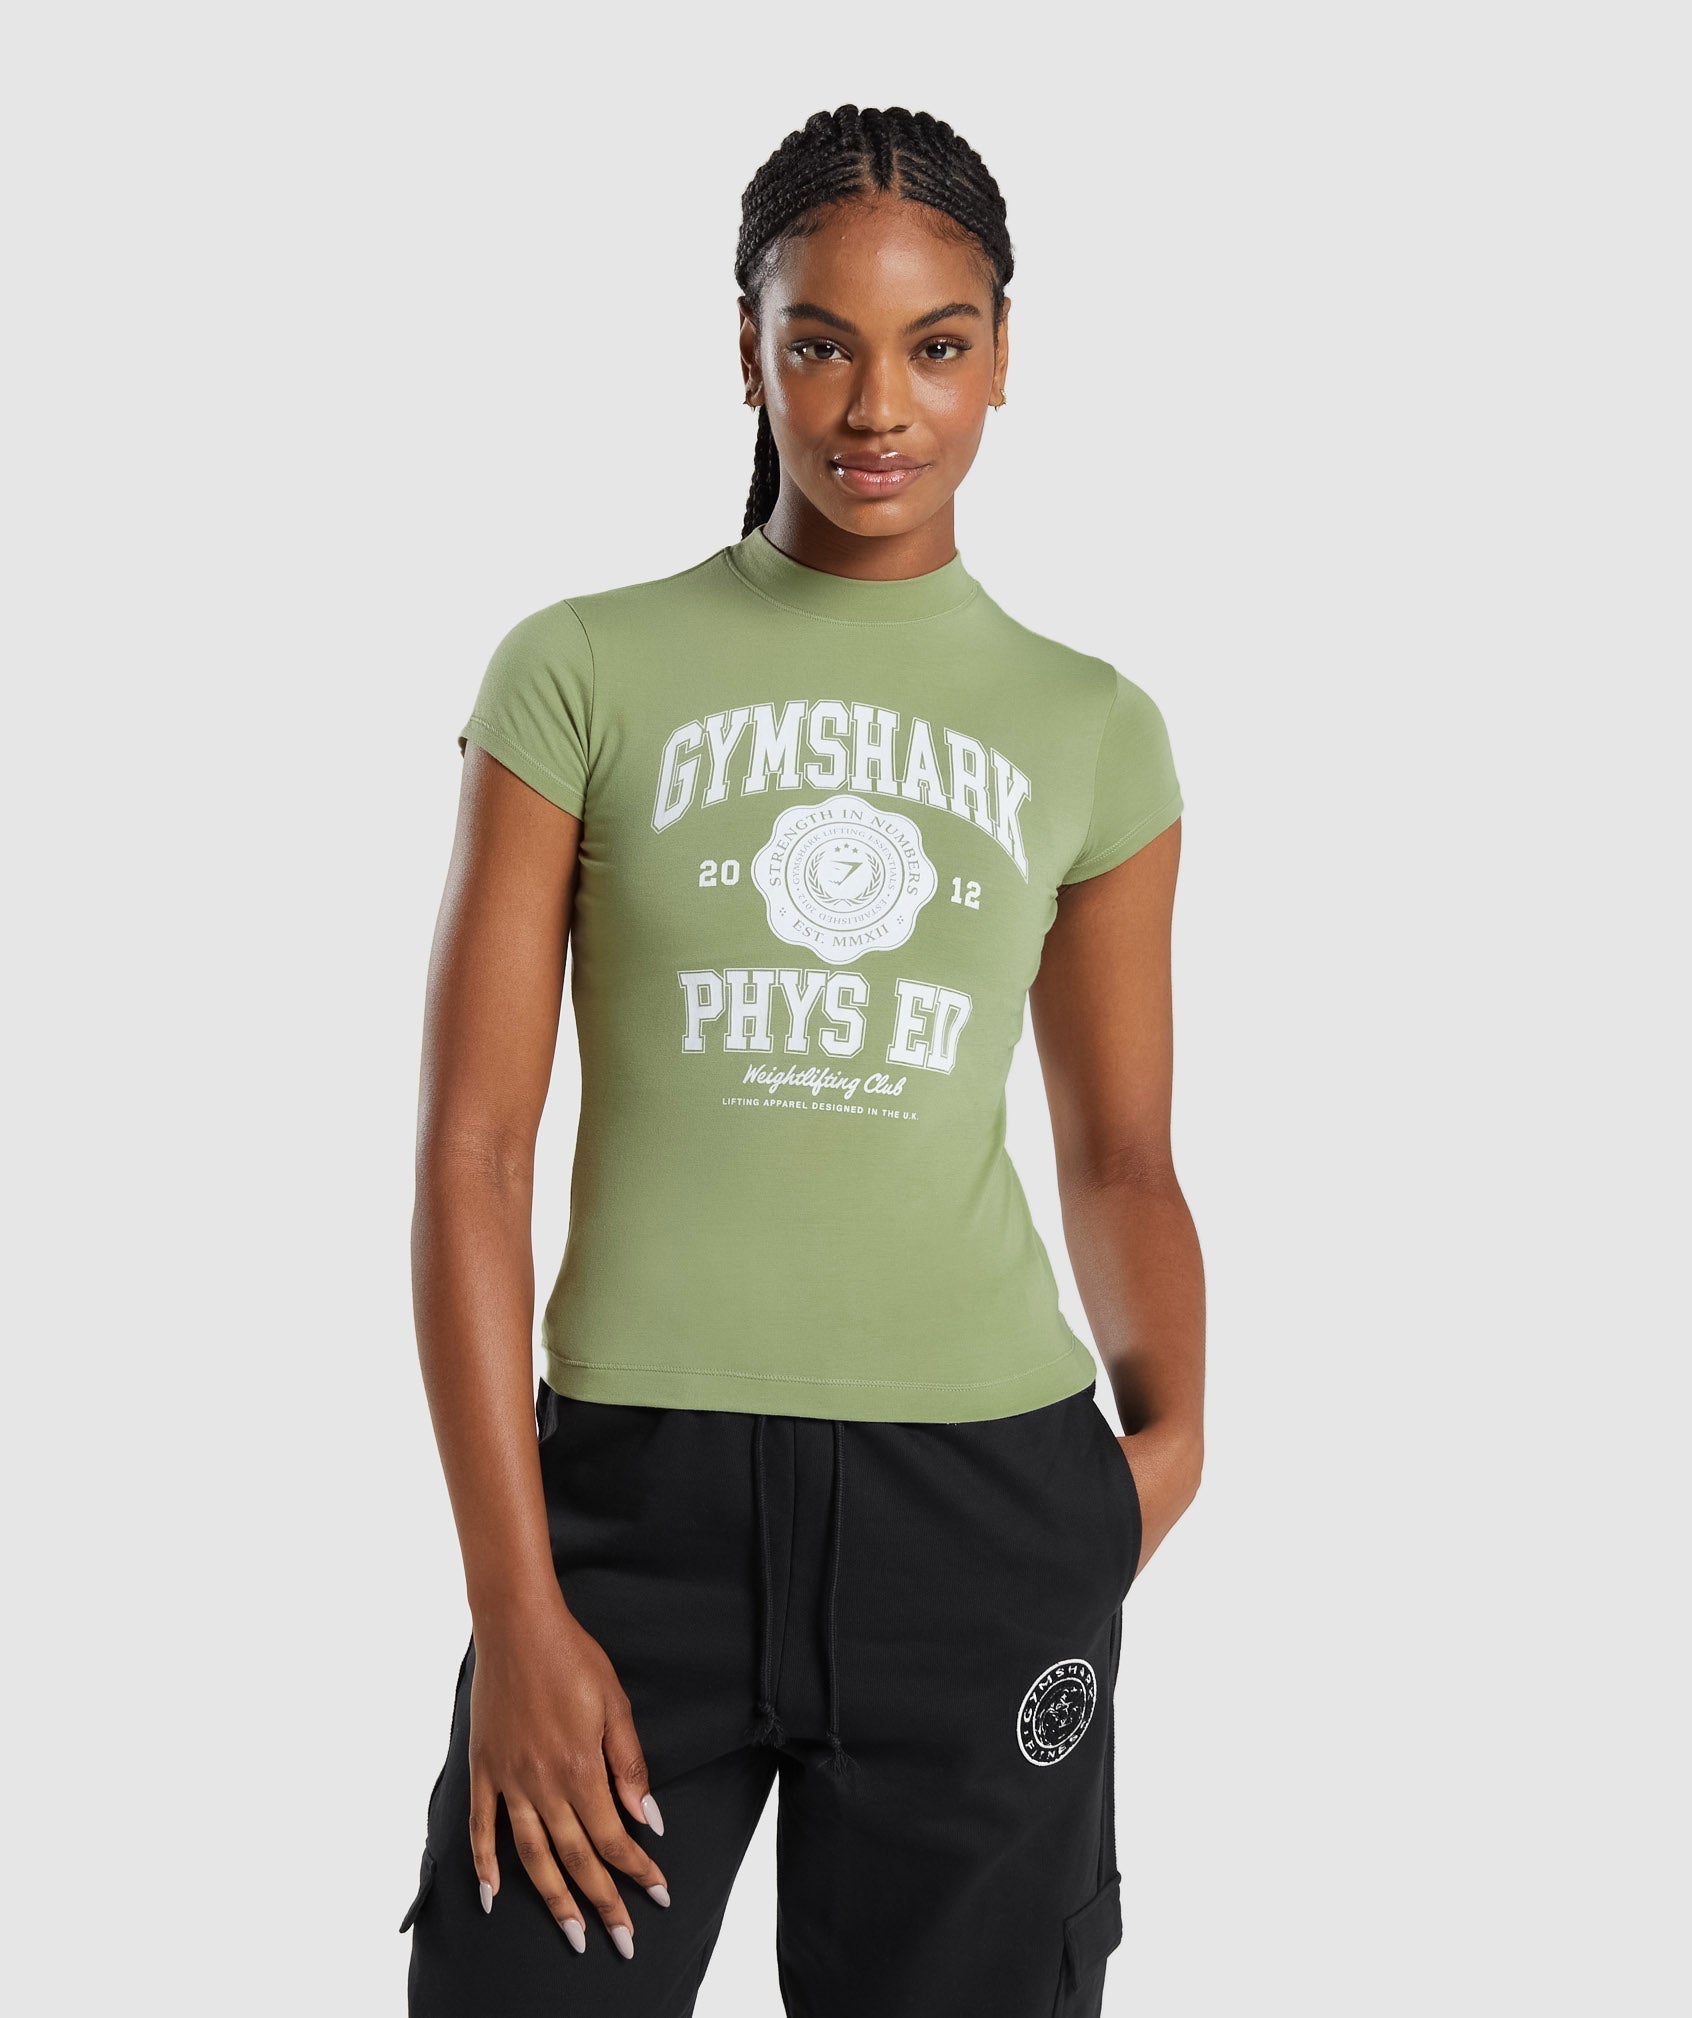 Phys Ed Graphic Body Fit T-Shirt in Light Sage Green